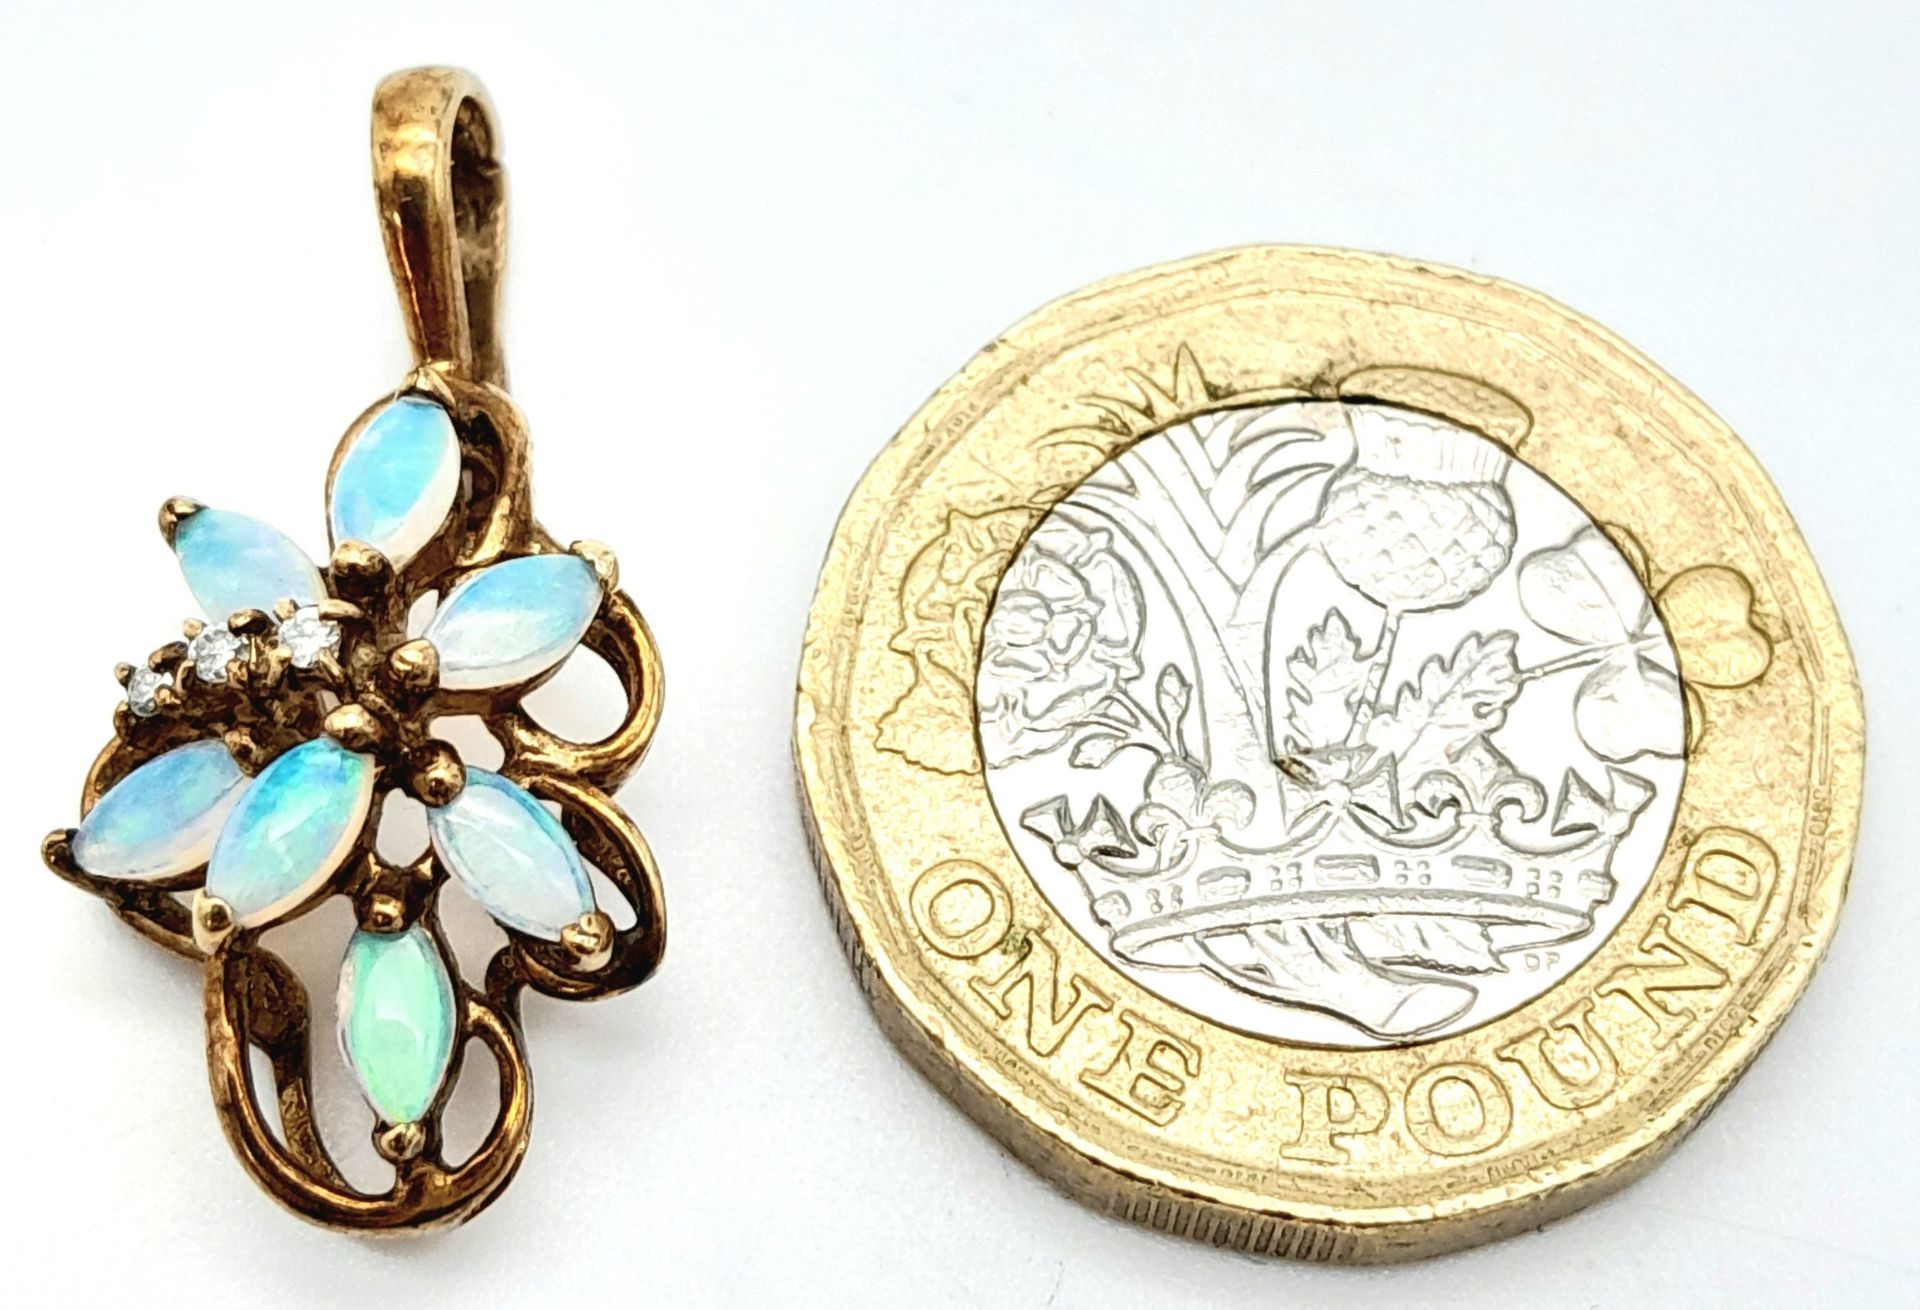 A 9K YELLOW GOLD DIAMOND & OPAL SET VINTAGE PENDANT. 2.7cm length, 1.9g total weight. Ref: SC 8040 - Image 4 of 4